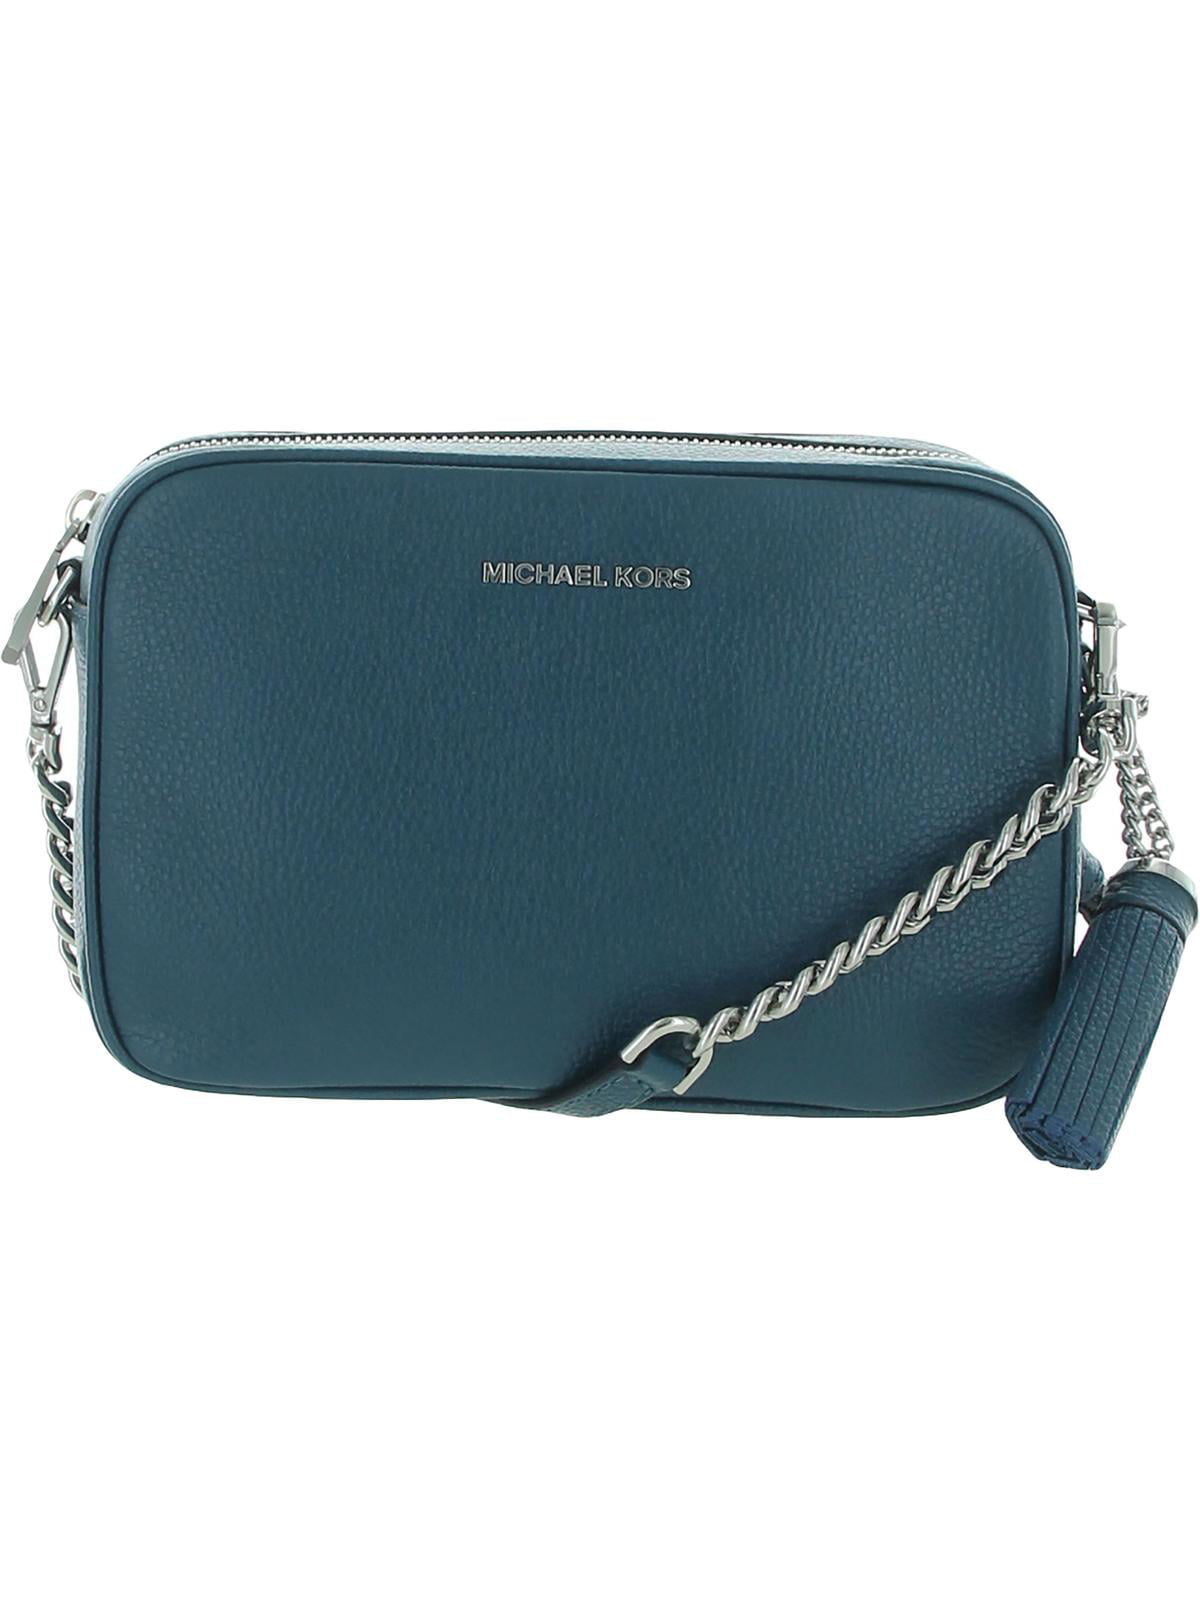 Michael Kors Ginny Ladies Small Teal Leather Crossbody Bag 32F7SGNM8L402 